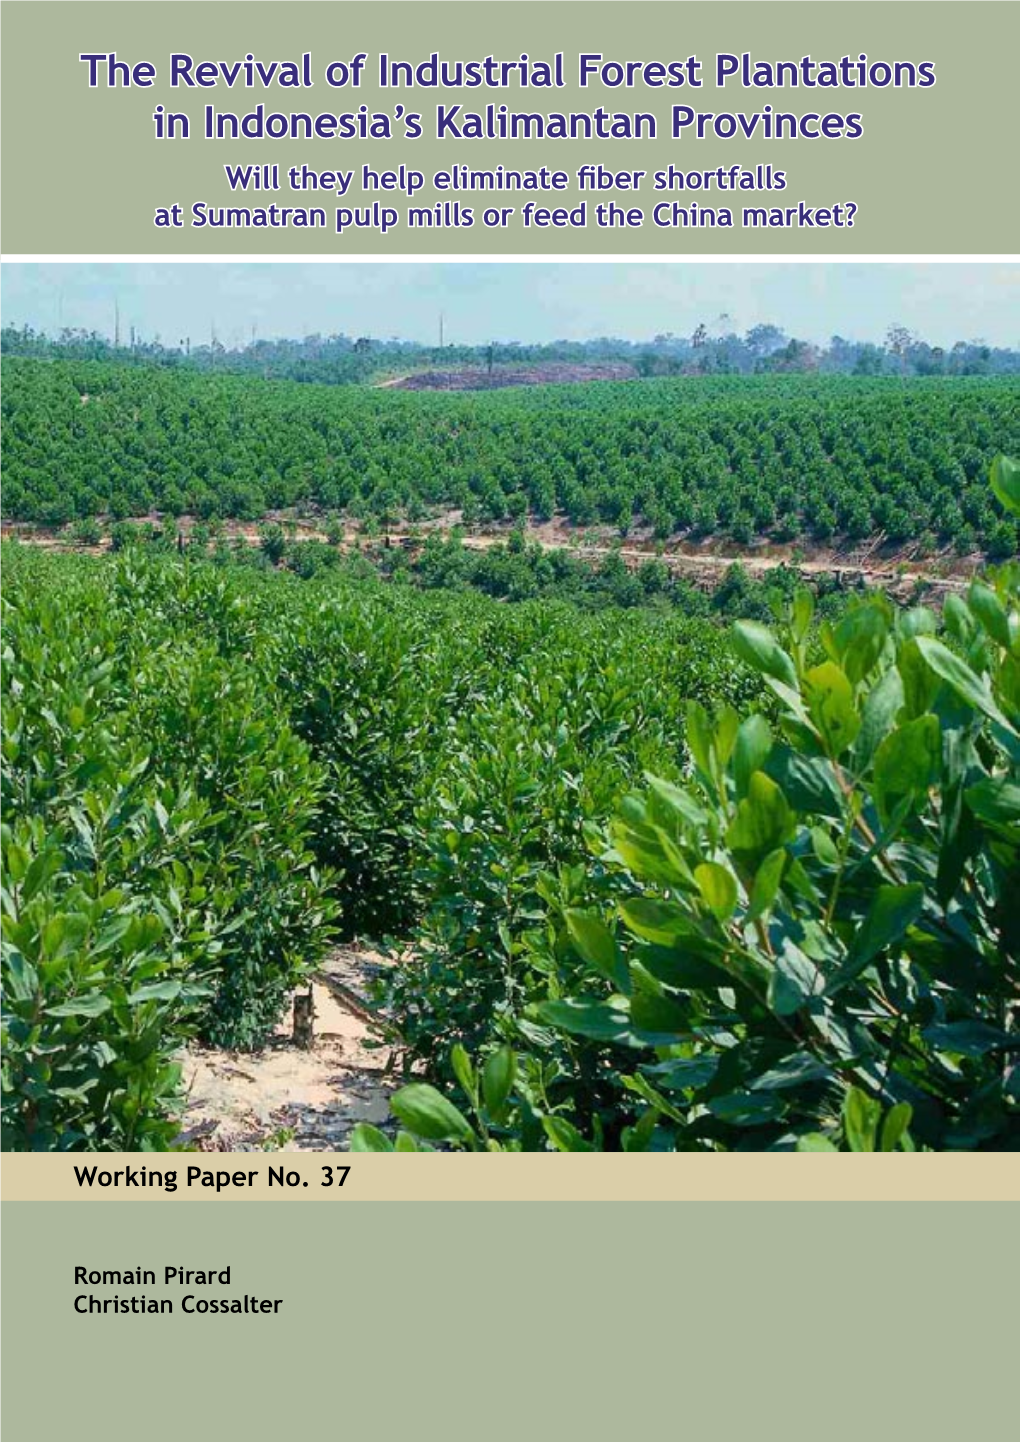 The Revival of Industrial Forest Plantations in Indonesia's Kalimantan Provinces